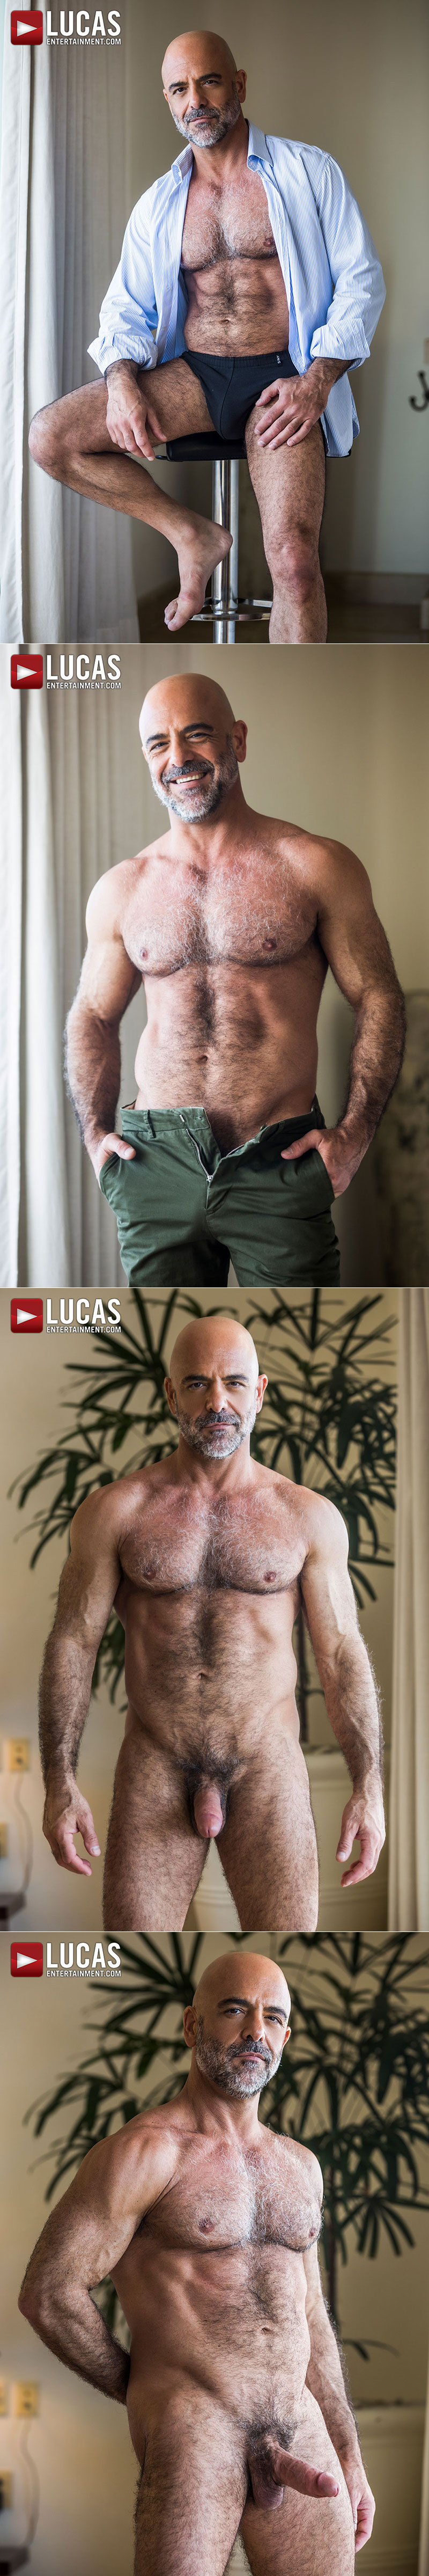 Lucas Entertainment: Adam Russo, Ruslan Angelo and Max Adonis' raw threeway in "Daddy's in Charge"